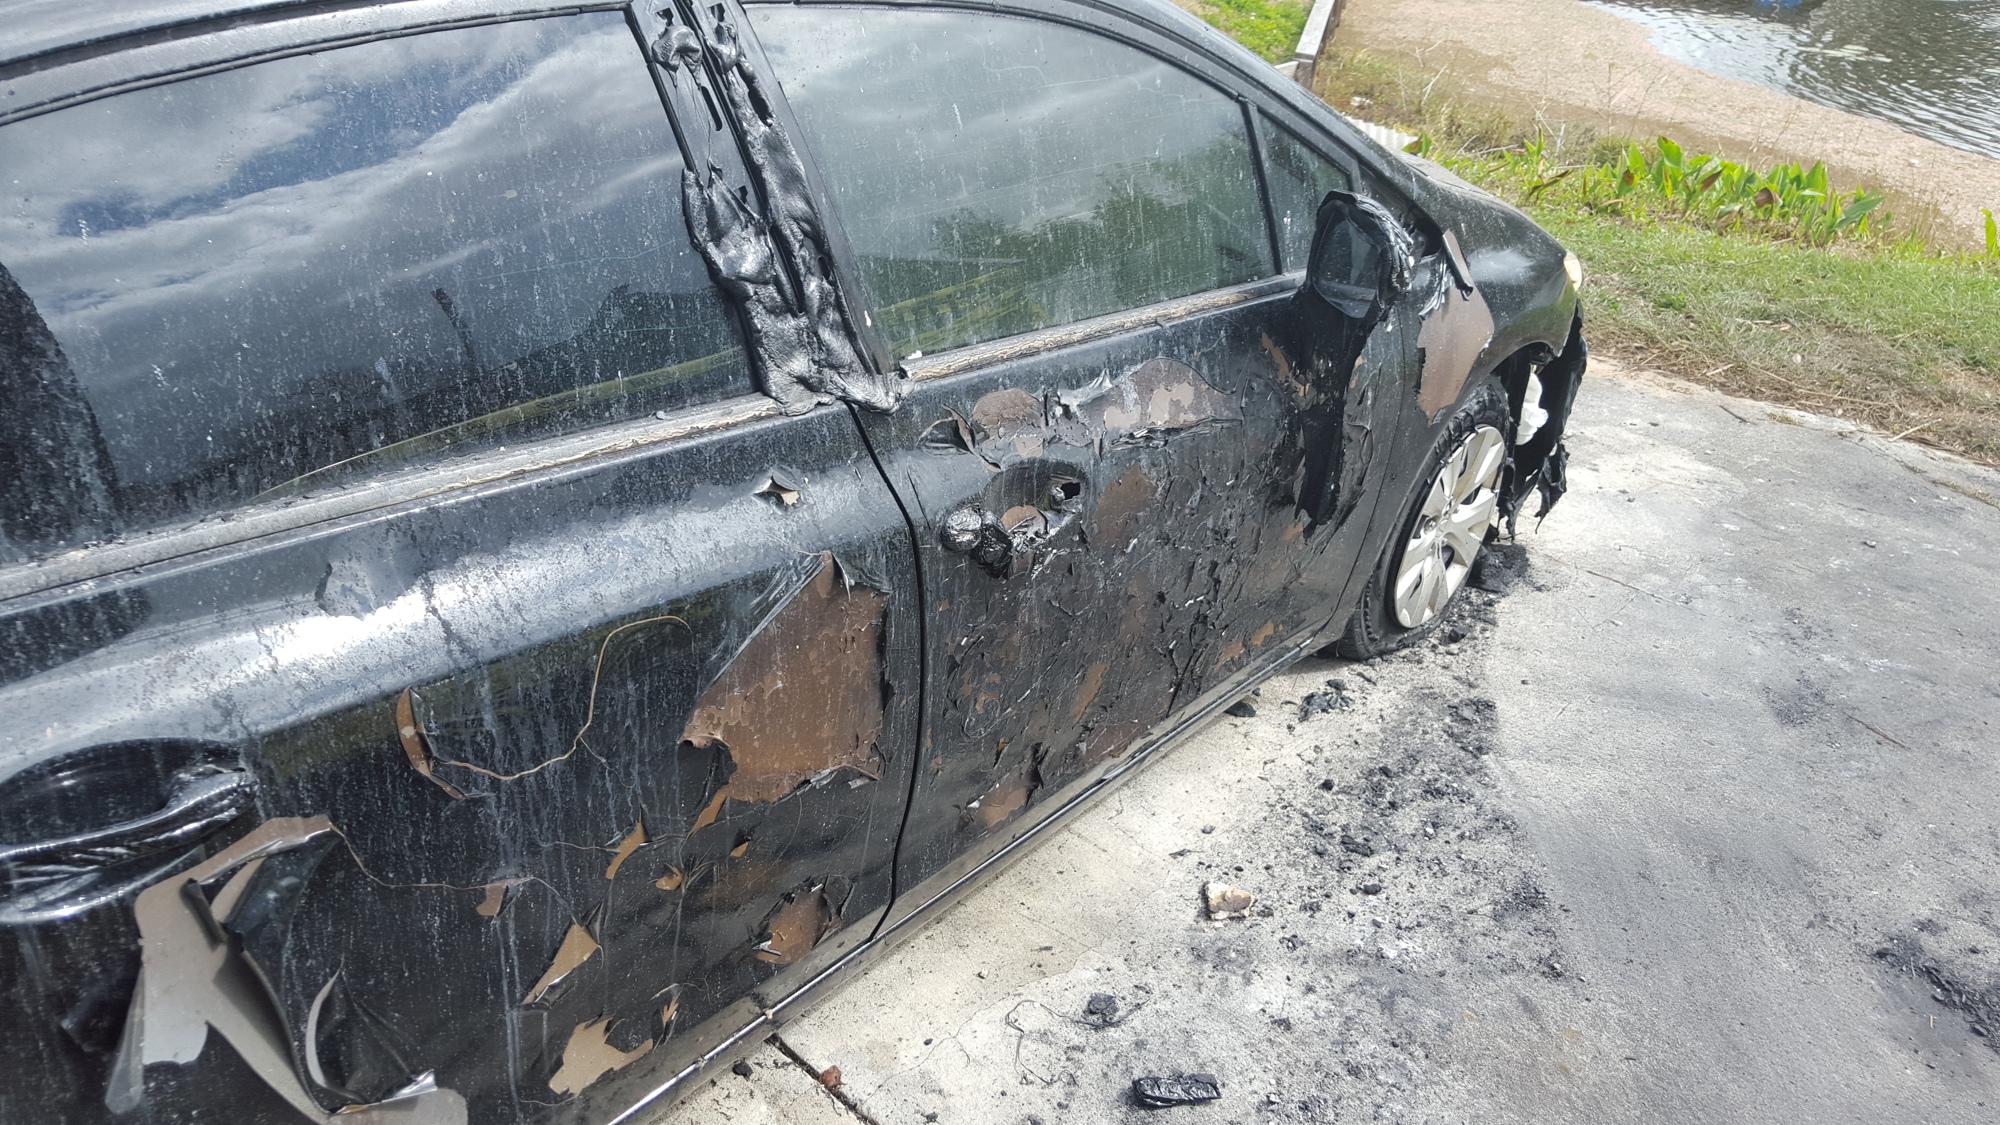 Jamee Gilson’s daughter’s torched car was parked on the side of the home near the porch and bathroom, which went up in flames.